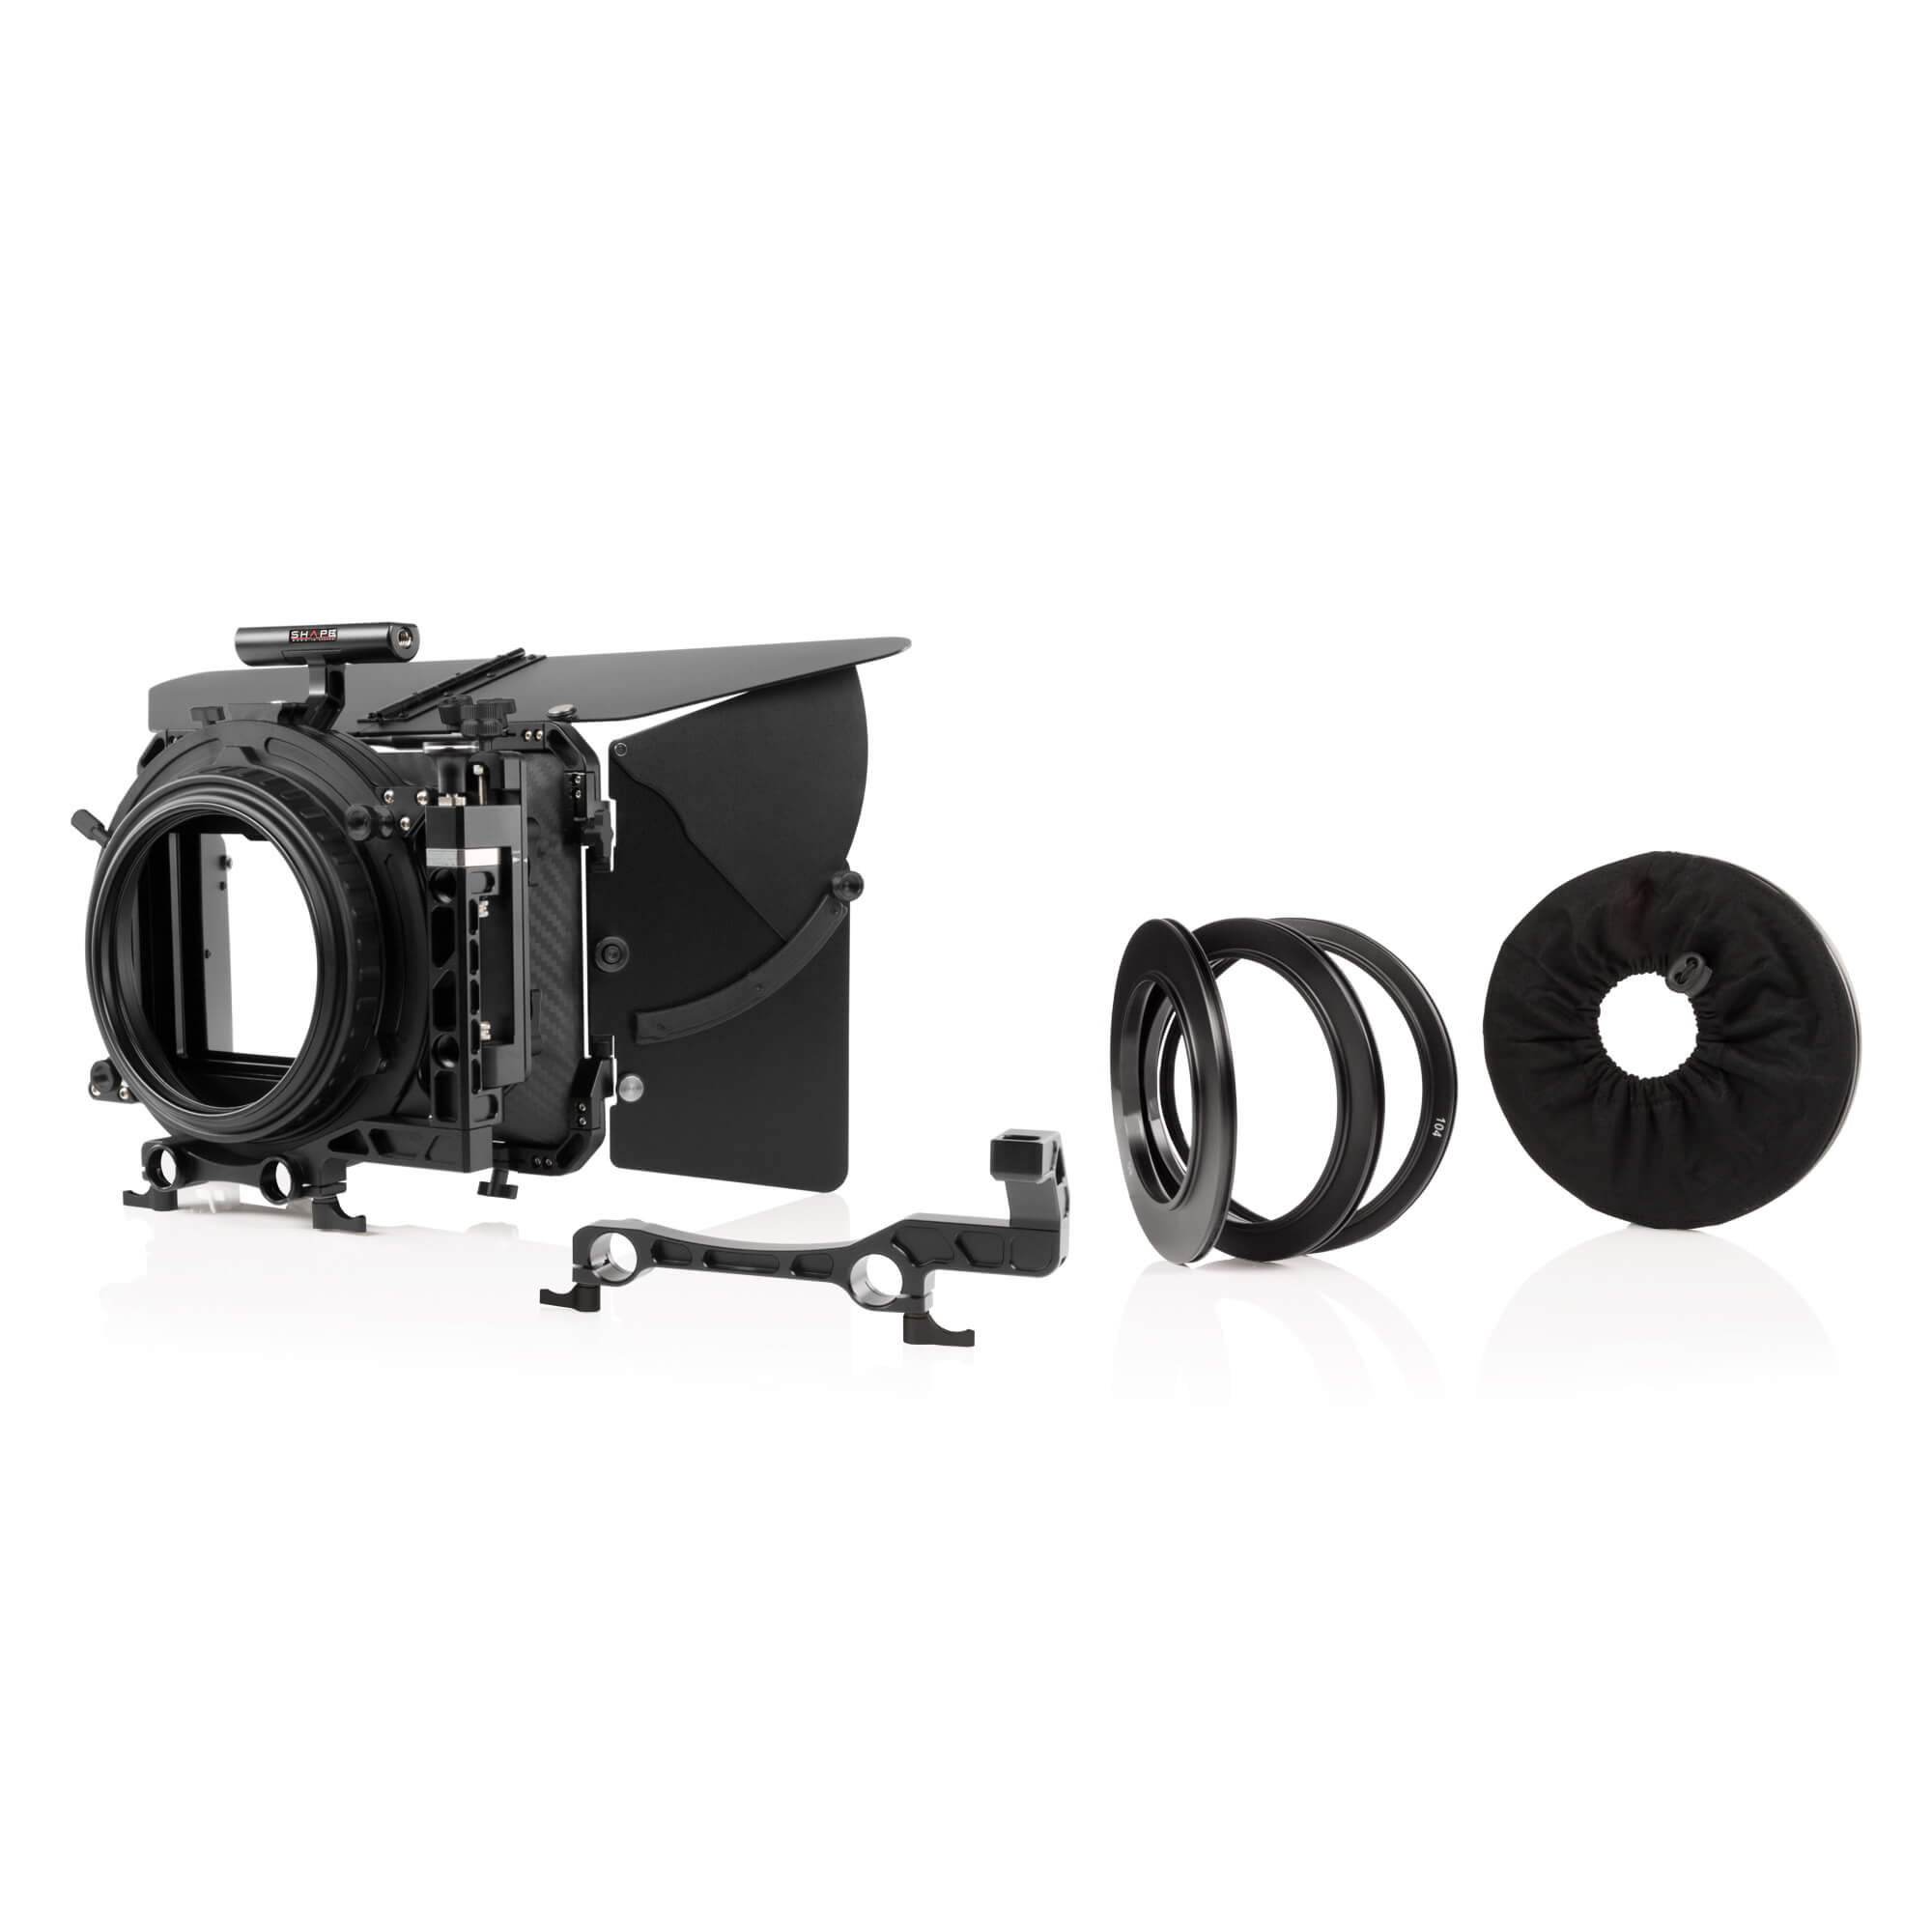 CAMTREE Carbon Fiber Professional Matte Box with Swing Away for 15mm Rod Support for Video DSLR Moving Making Camera Lenses up to 105mm C-MB-20-CF